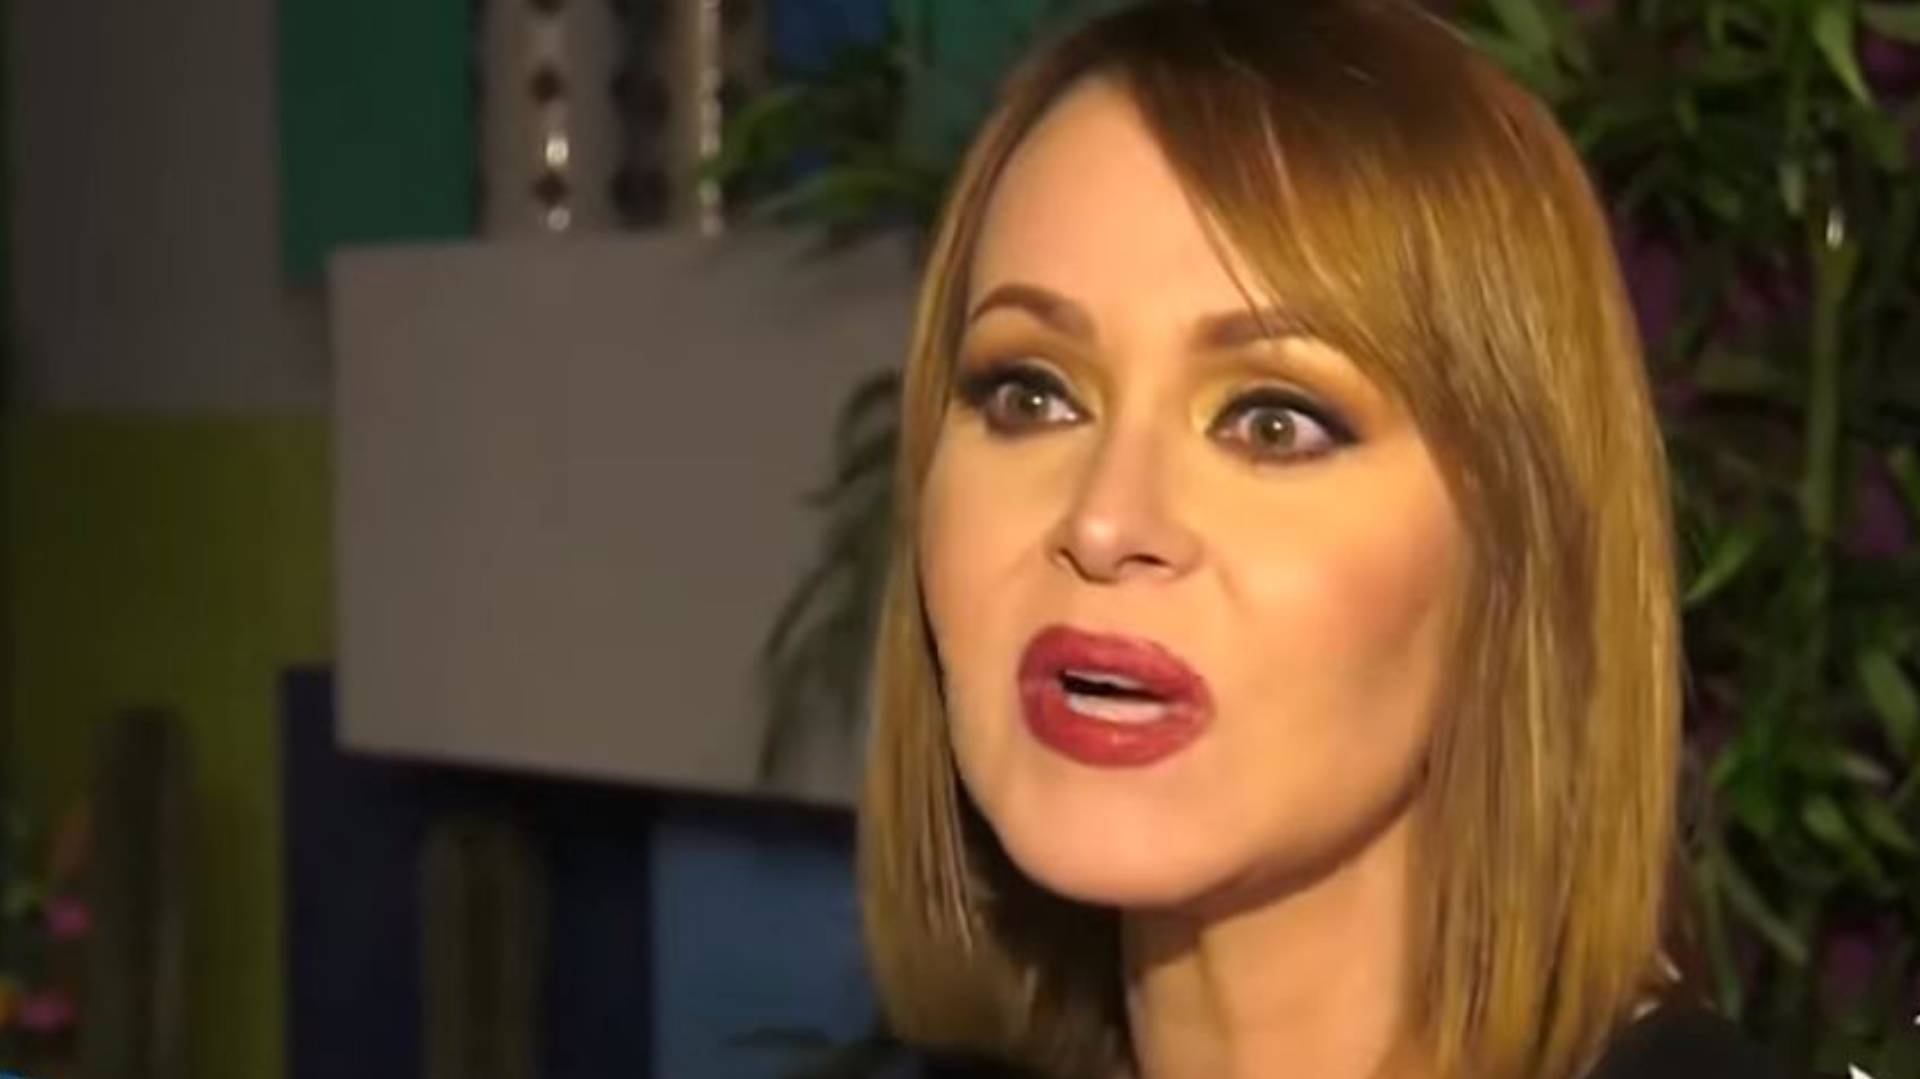 Gaby Spanic could not appear in the new version of "La Usurpadora" (Video: Televisa screenshot)